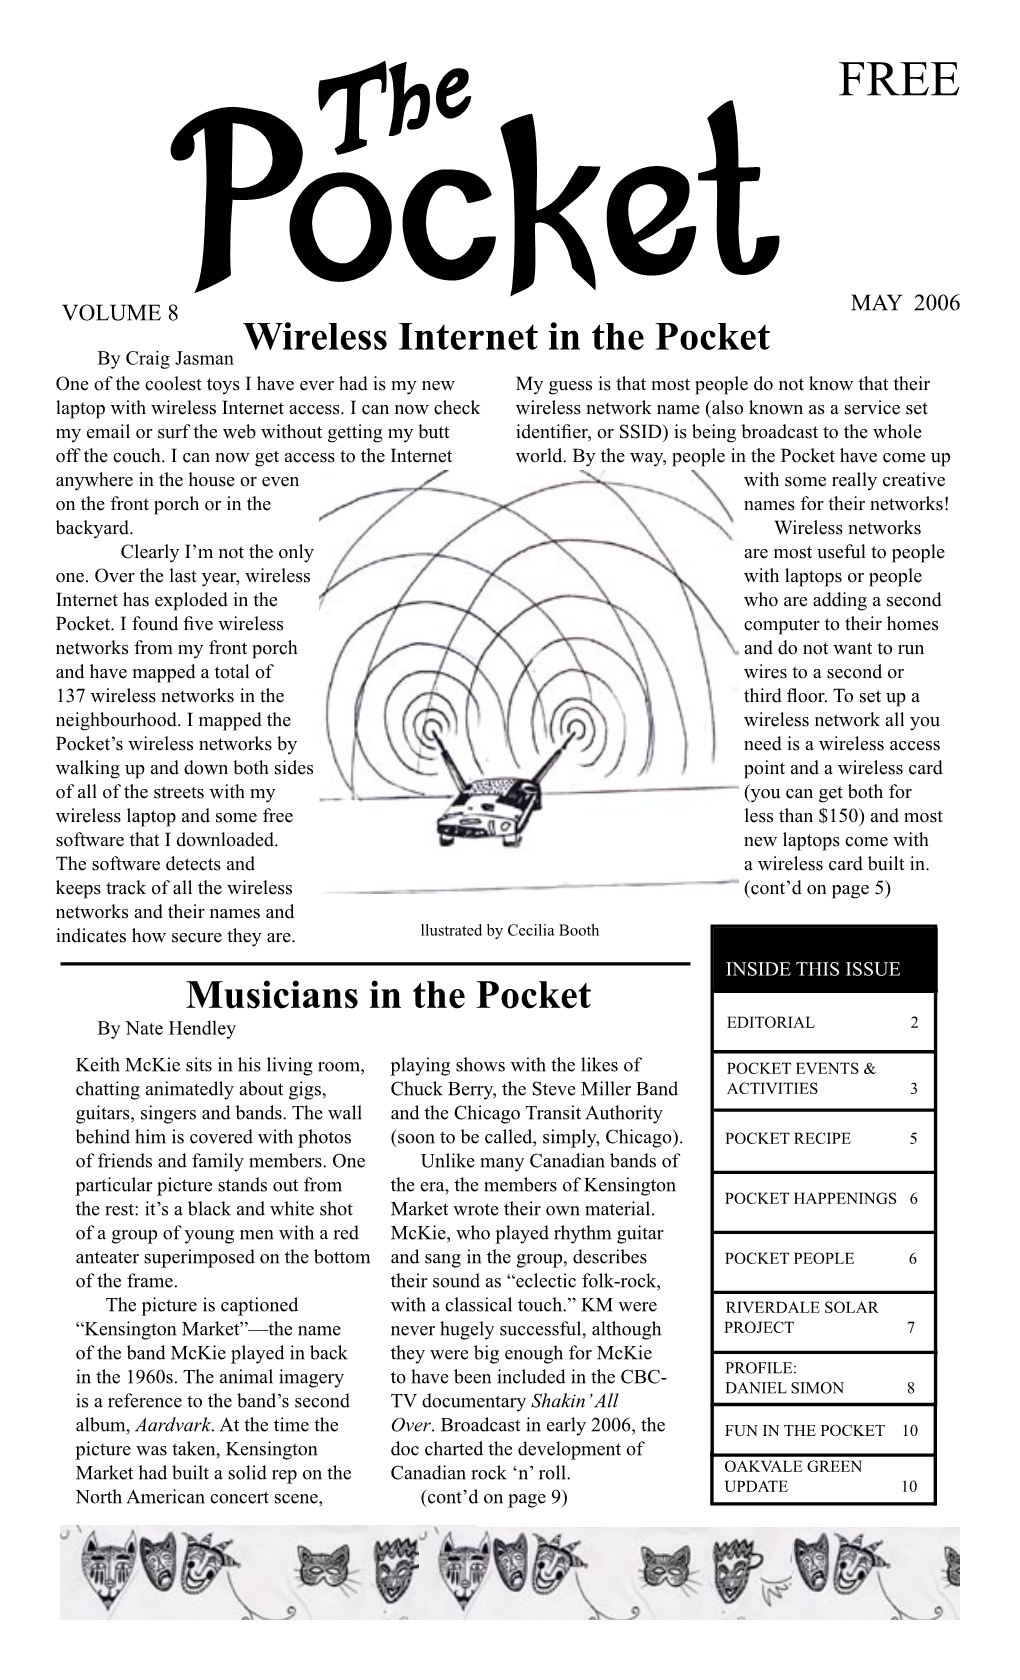 Wireless Internet in the Pocket Musicians in the Pocket